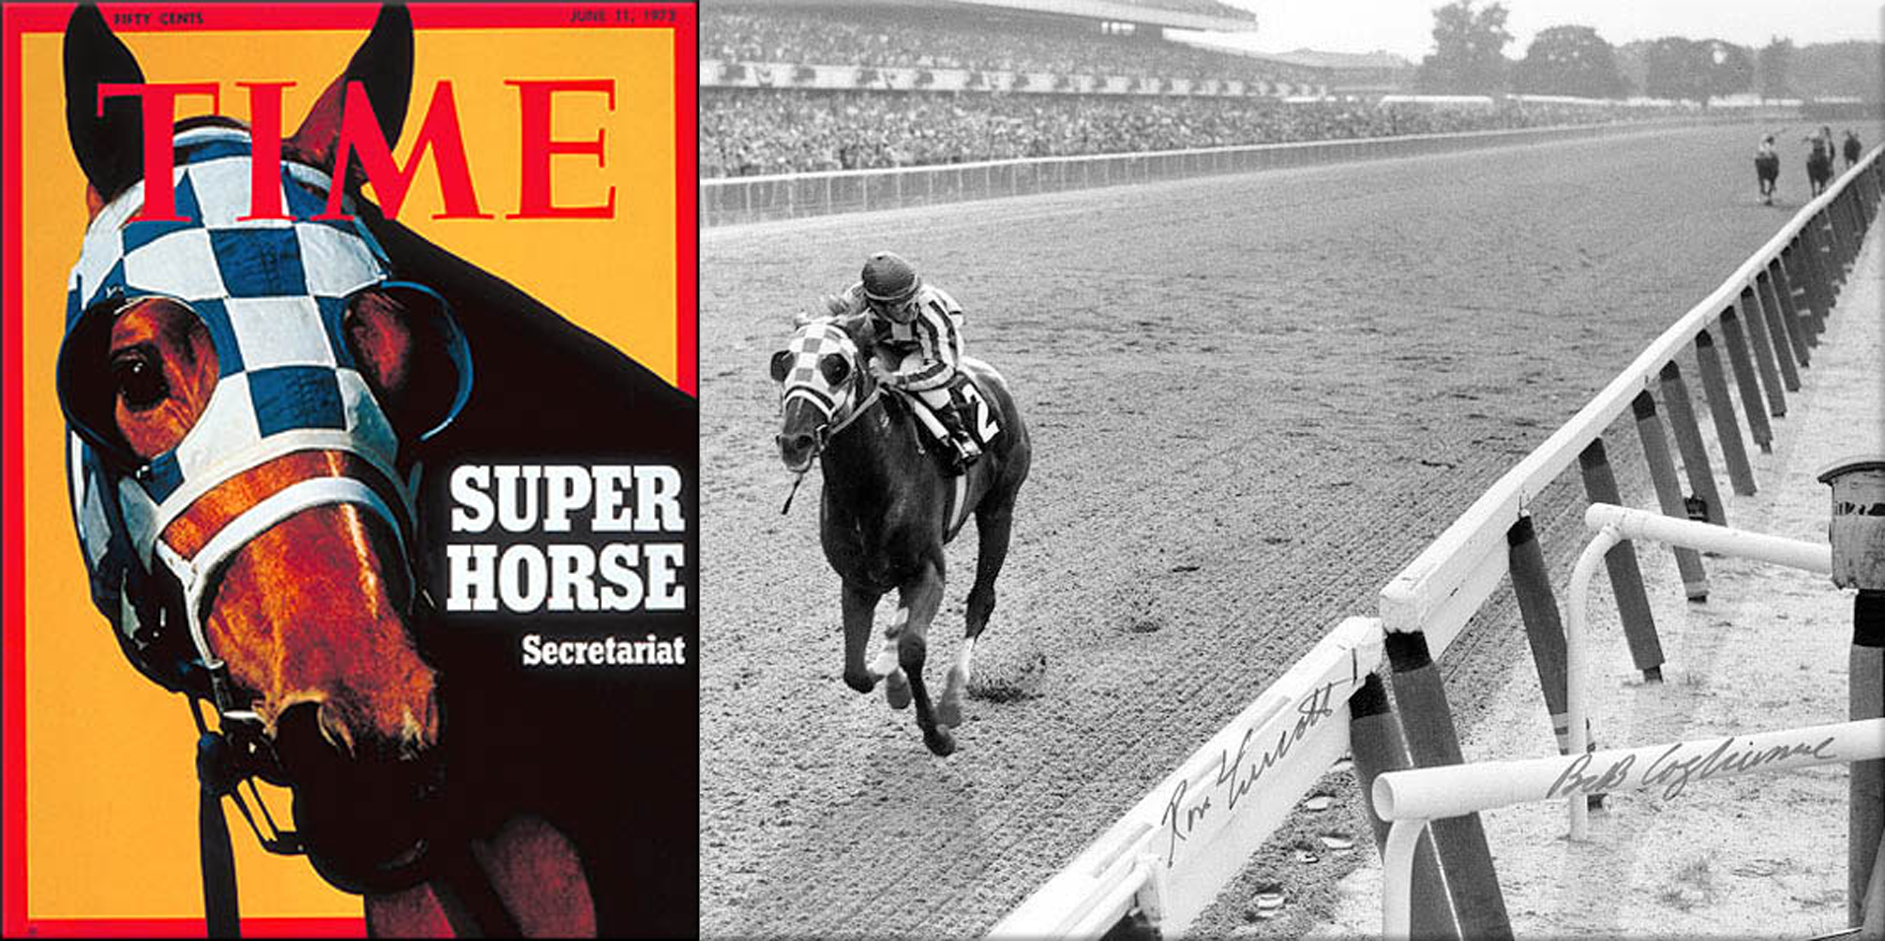 Secretariat: Cover of Time, June 11th, 1973 ● Secretariat (1970-89) was the winner of the 1973 Triple Crown and is widely considered to be one of the greatest Thoroughbred race horses of all time, ESPN